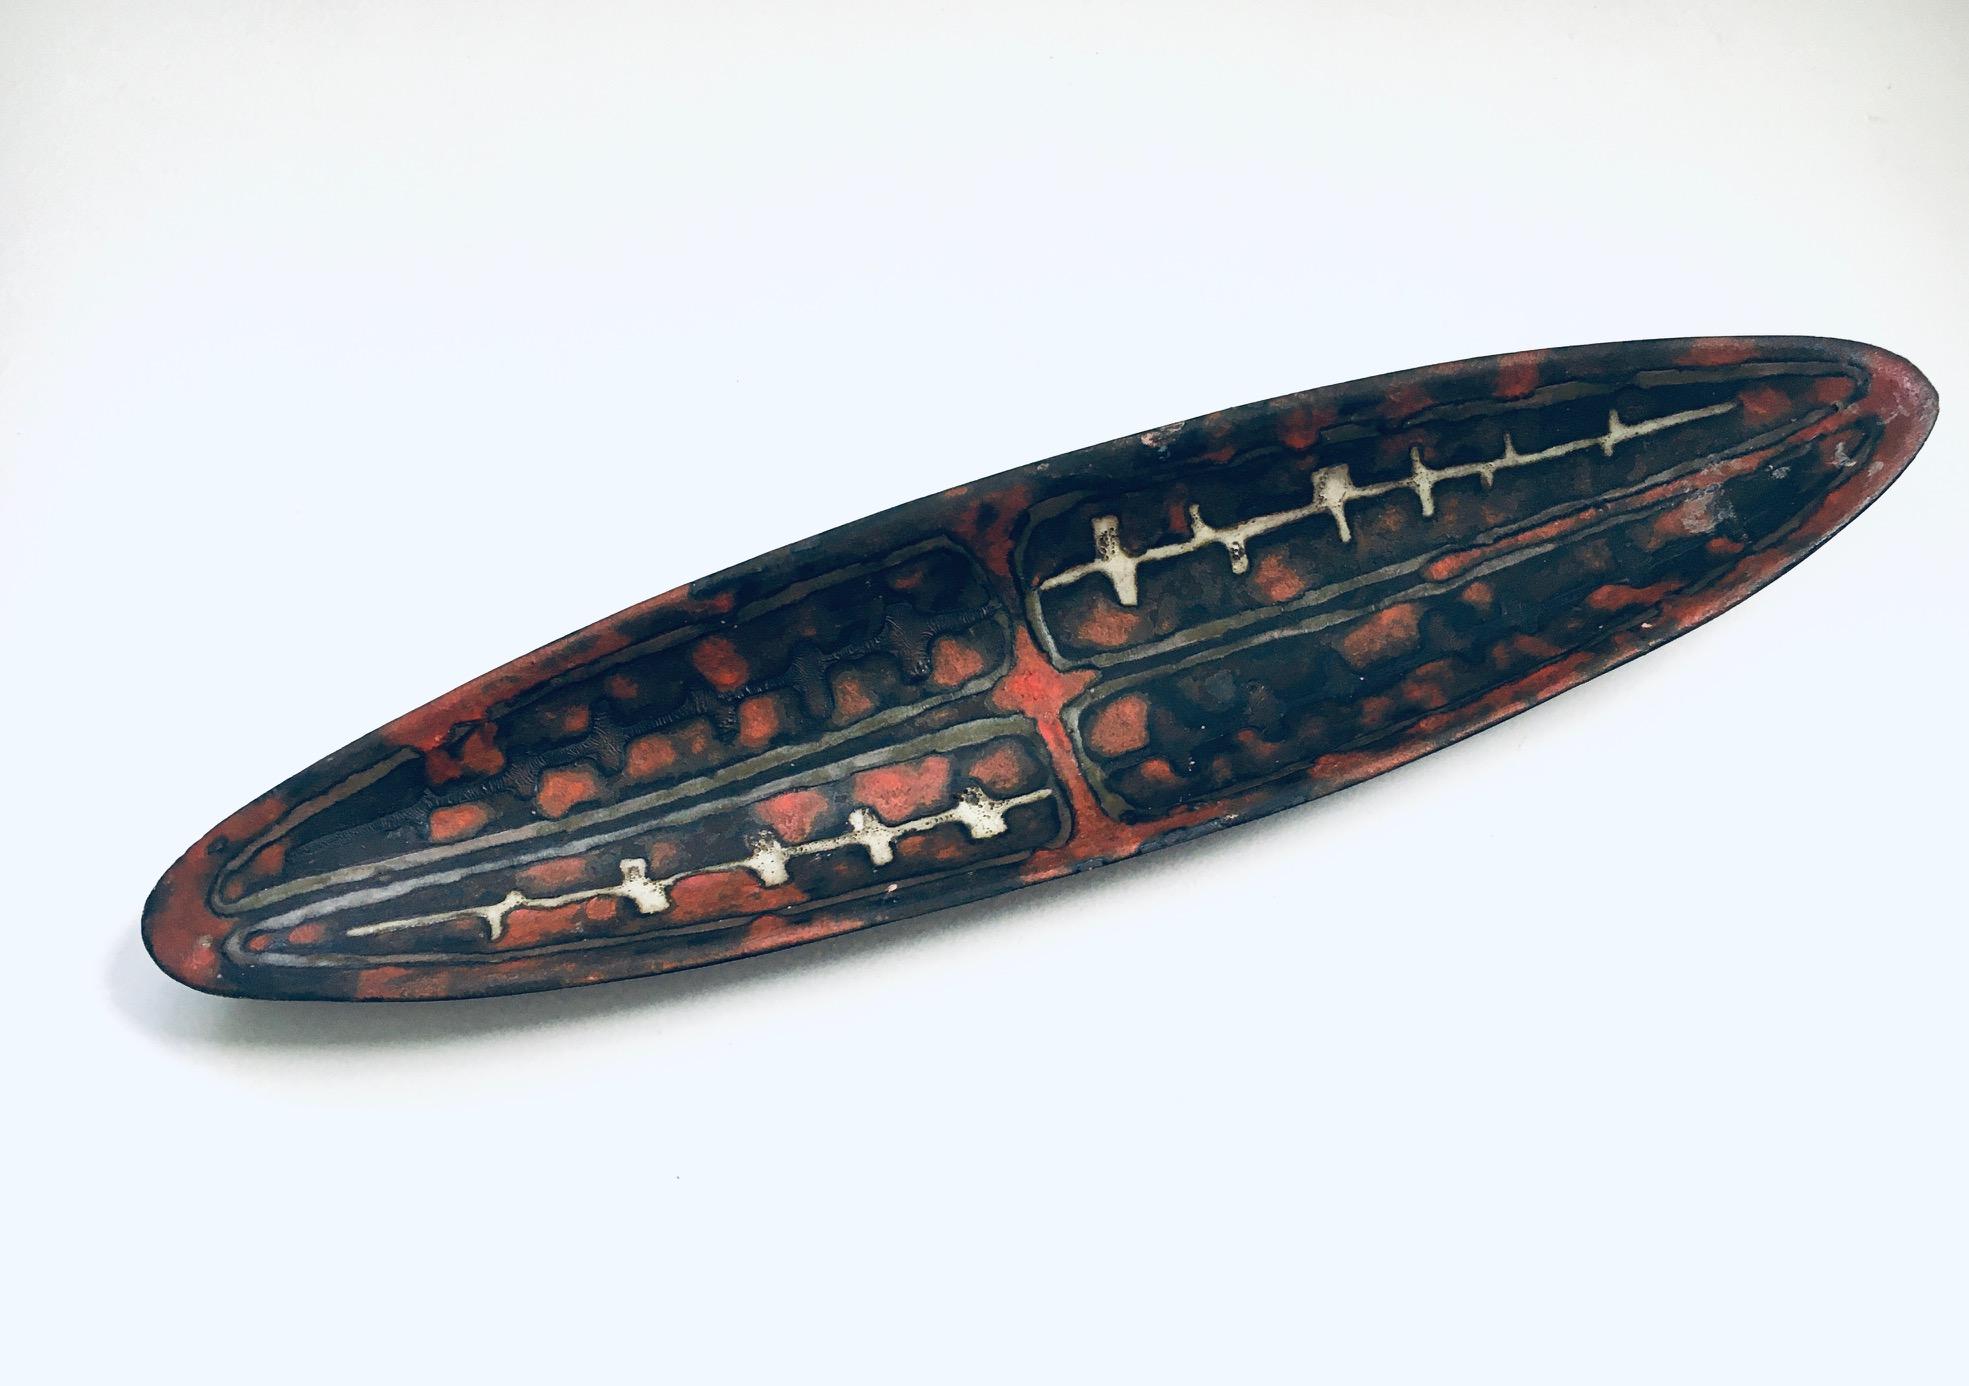 Mid-20th Century Abstract Art Ceramic Surfboard Bowl Dish by Perignem Studio, Belgium 1960's For Sale